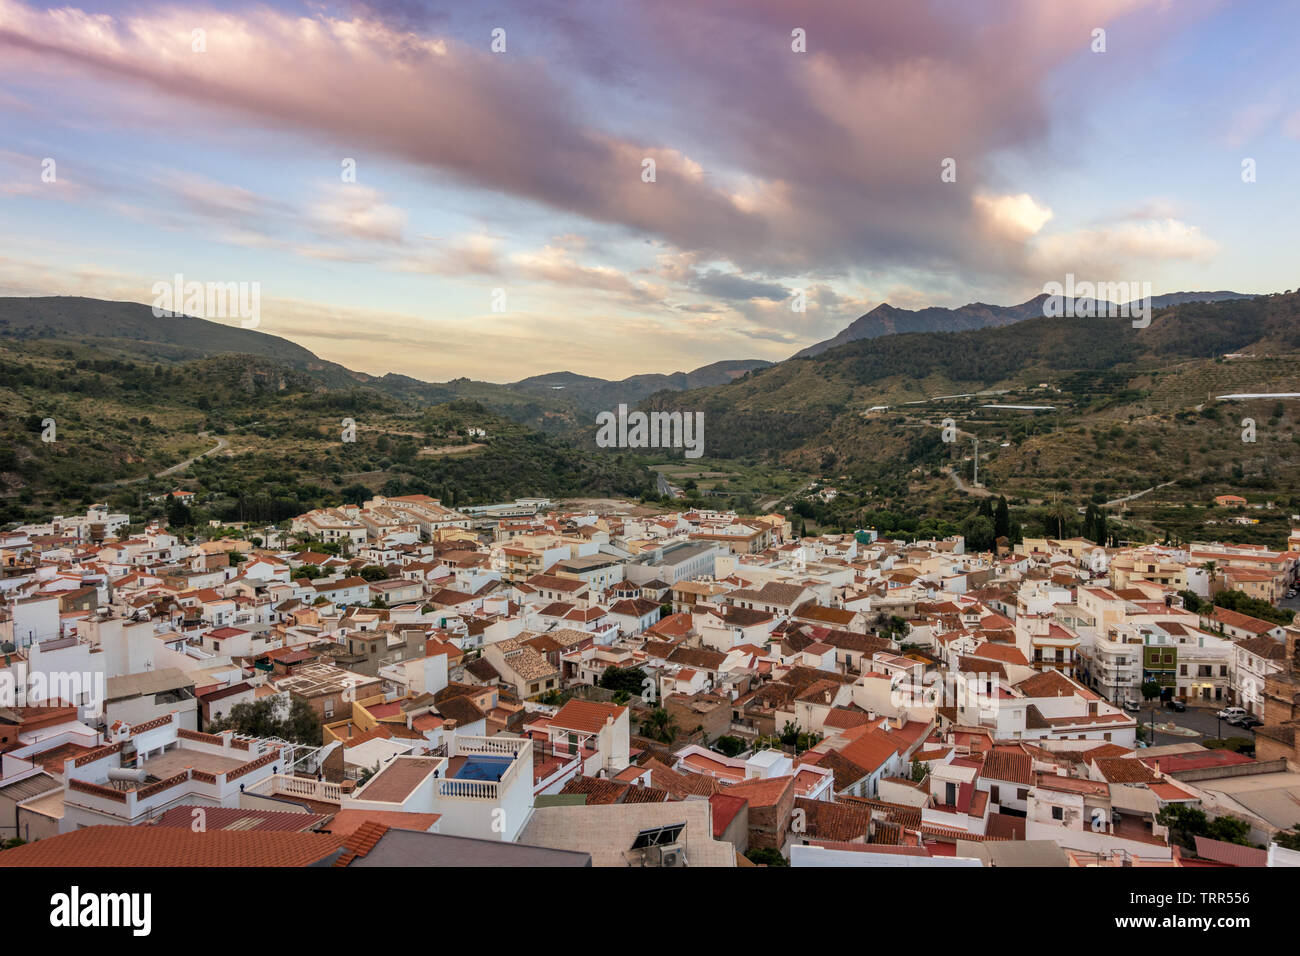 View of the town of white houses - Velez de Benaudalla - from above at sunrise, Sierra Nevada, Spain Stock Photo